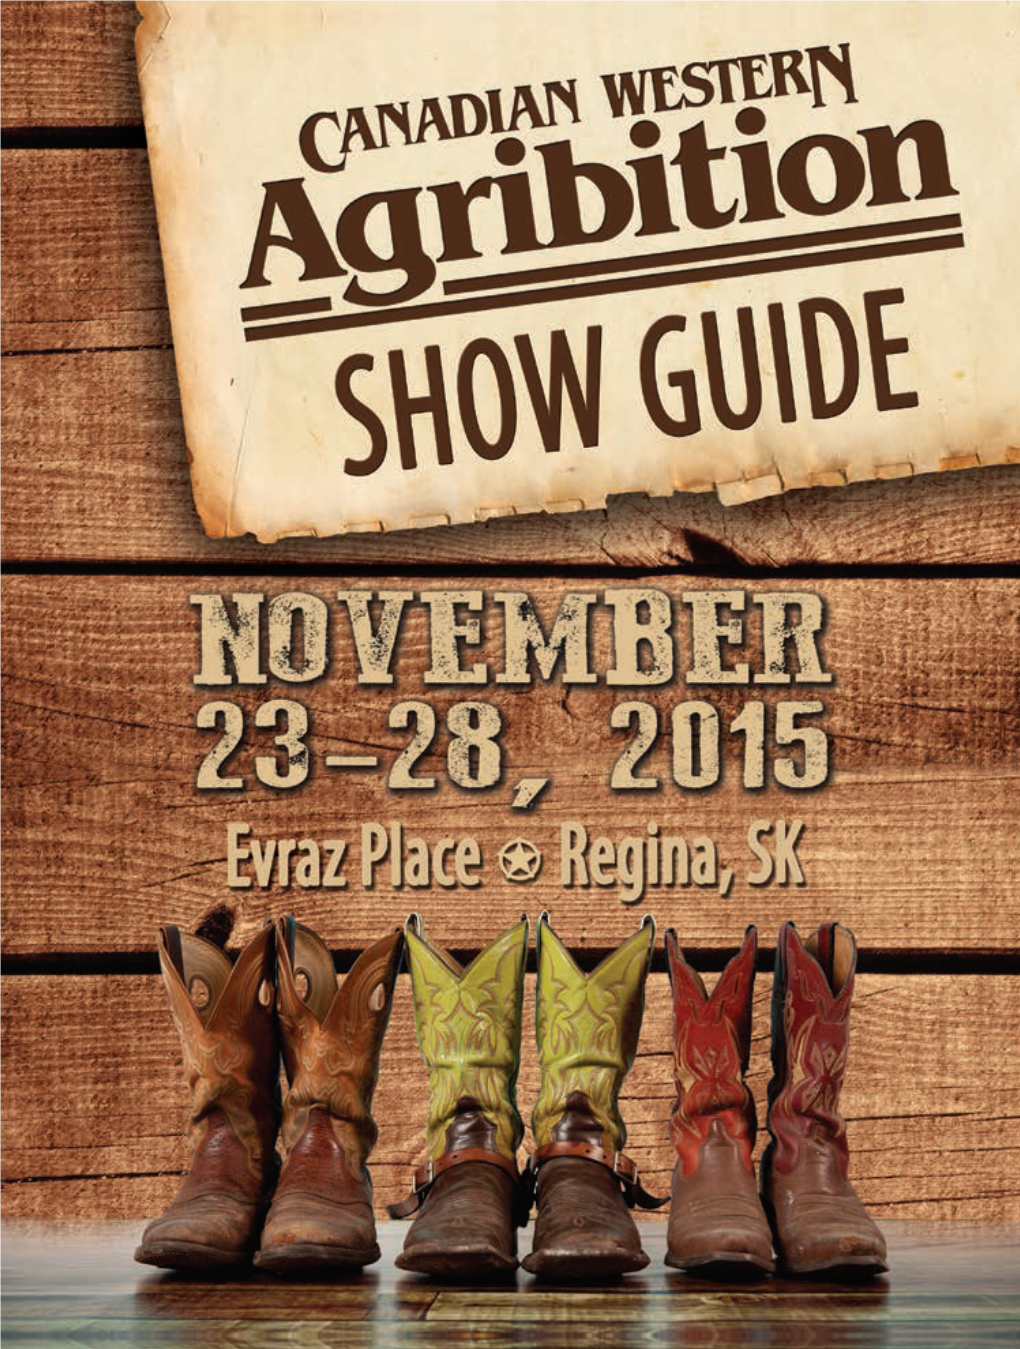 Canadian Western Agribition! Agribition Is Recognized Nationally and Internationally As North America’S Best Beef Show and Canada’S Premier Agriculture Showcase